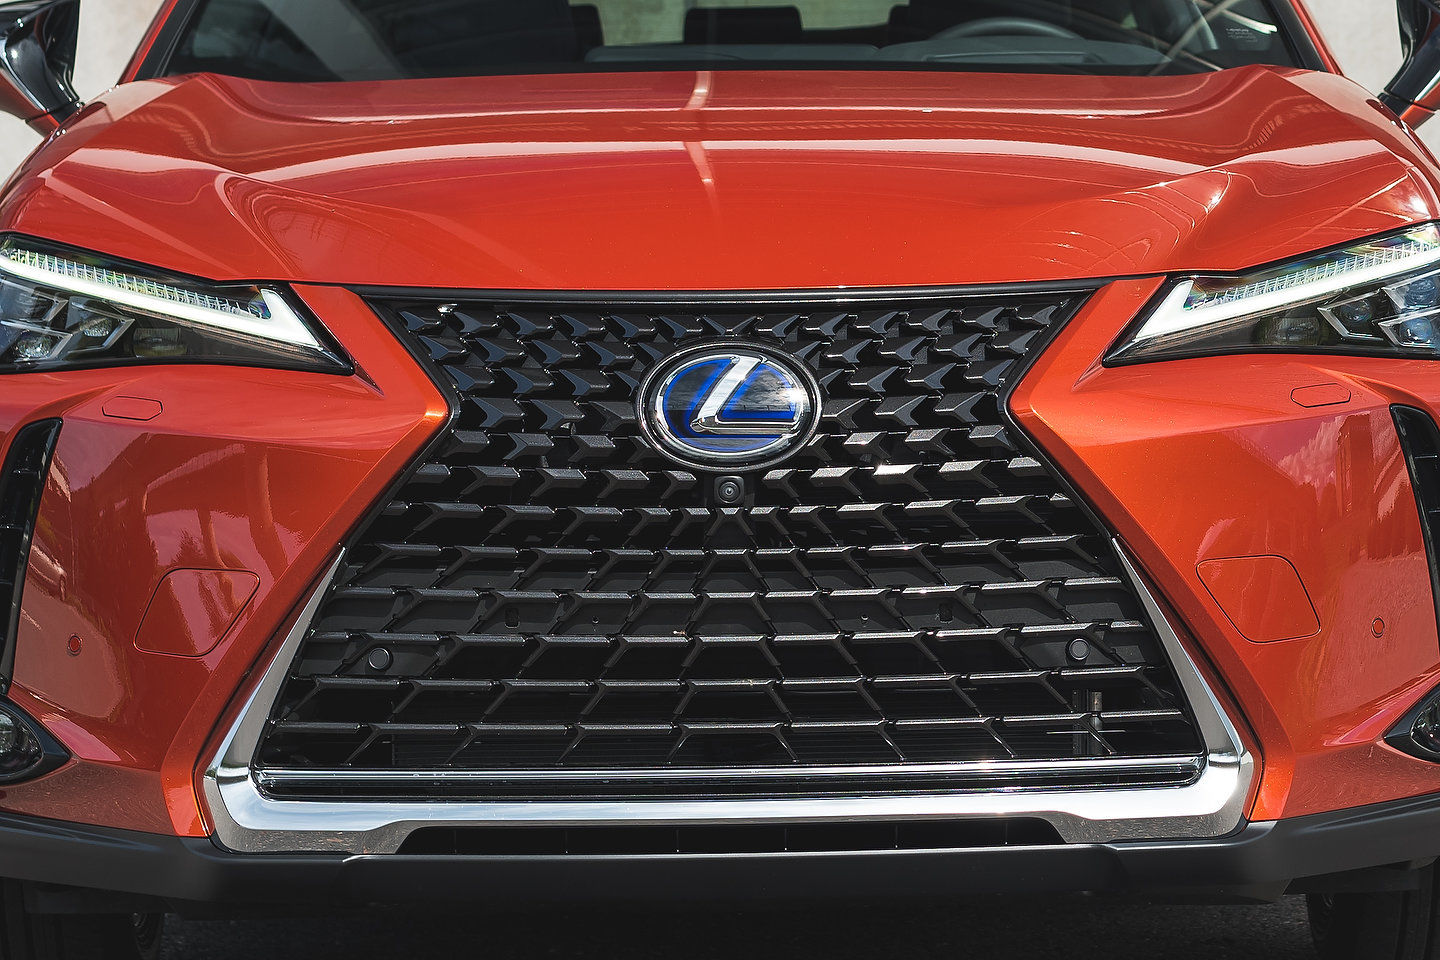 Lexus Plans to Introduce a New Electric Vehicle